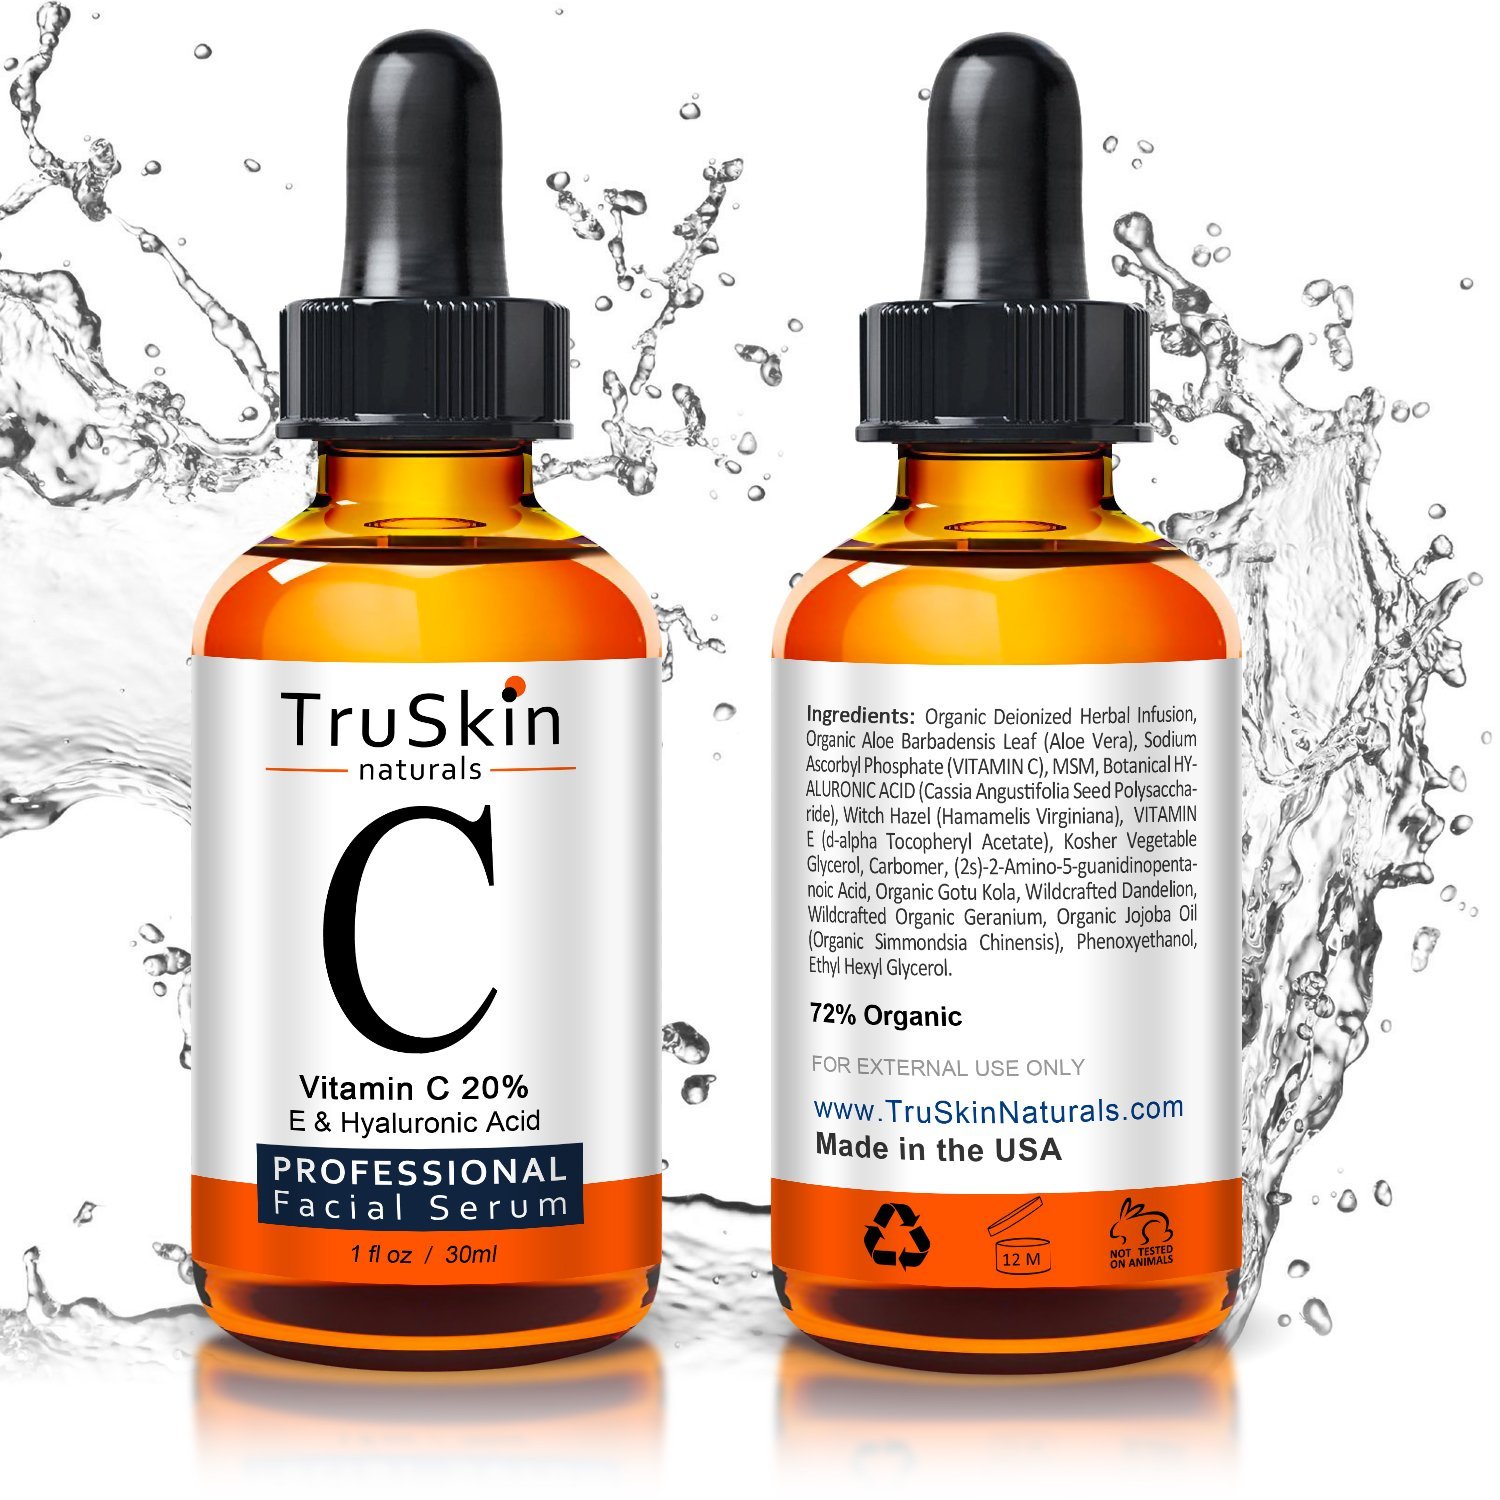 Truskin Naturals Serum For Face With Hyaluronic Acid 20 C E